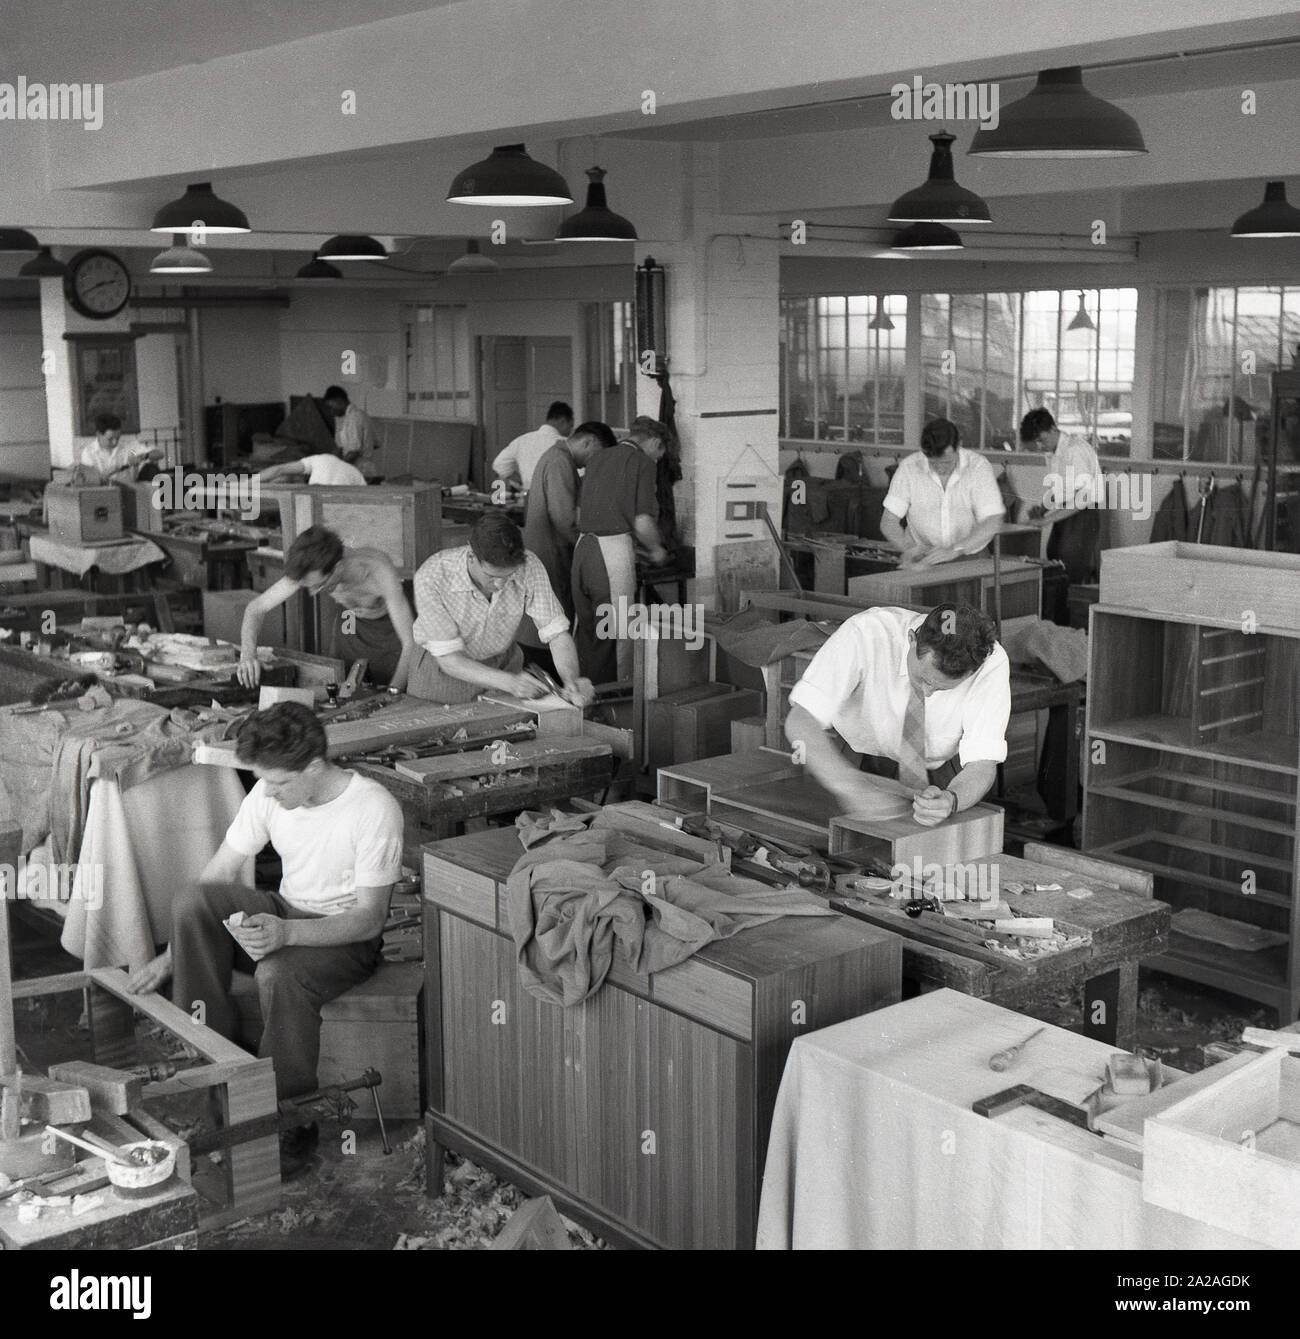 Cheshire in 1960s Photo of Woodwork Workshop in ICI Runcorn MRS-E0031